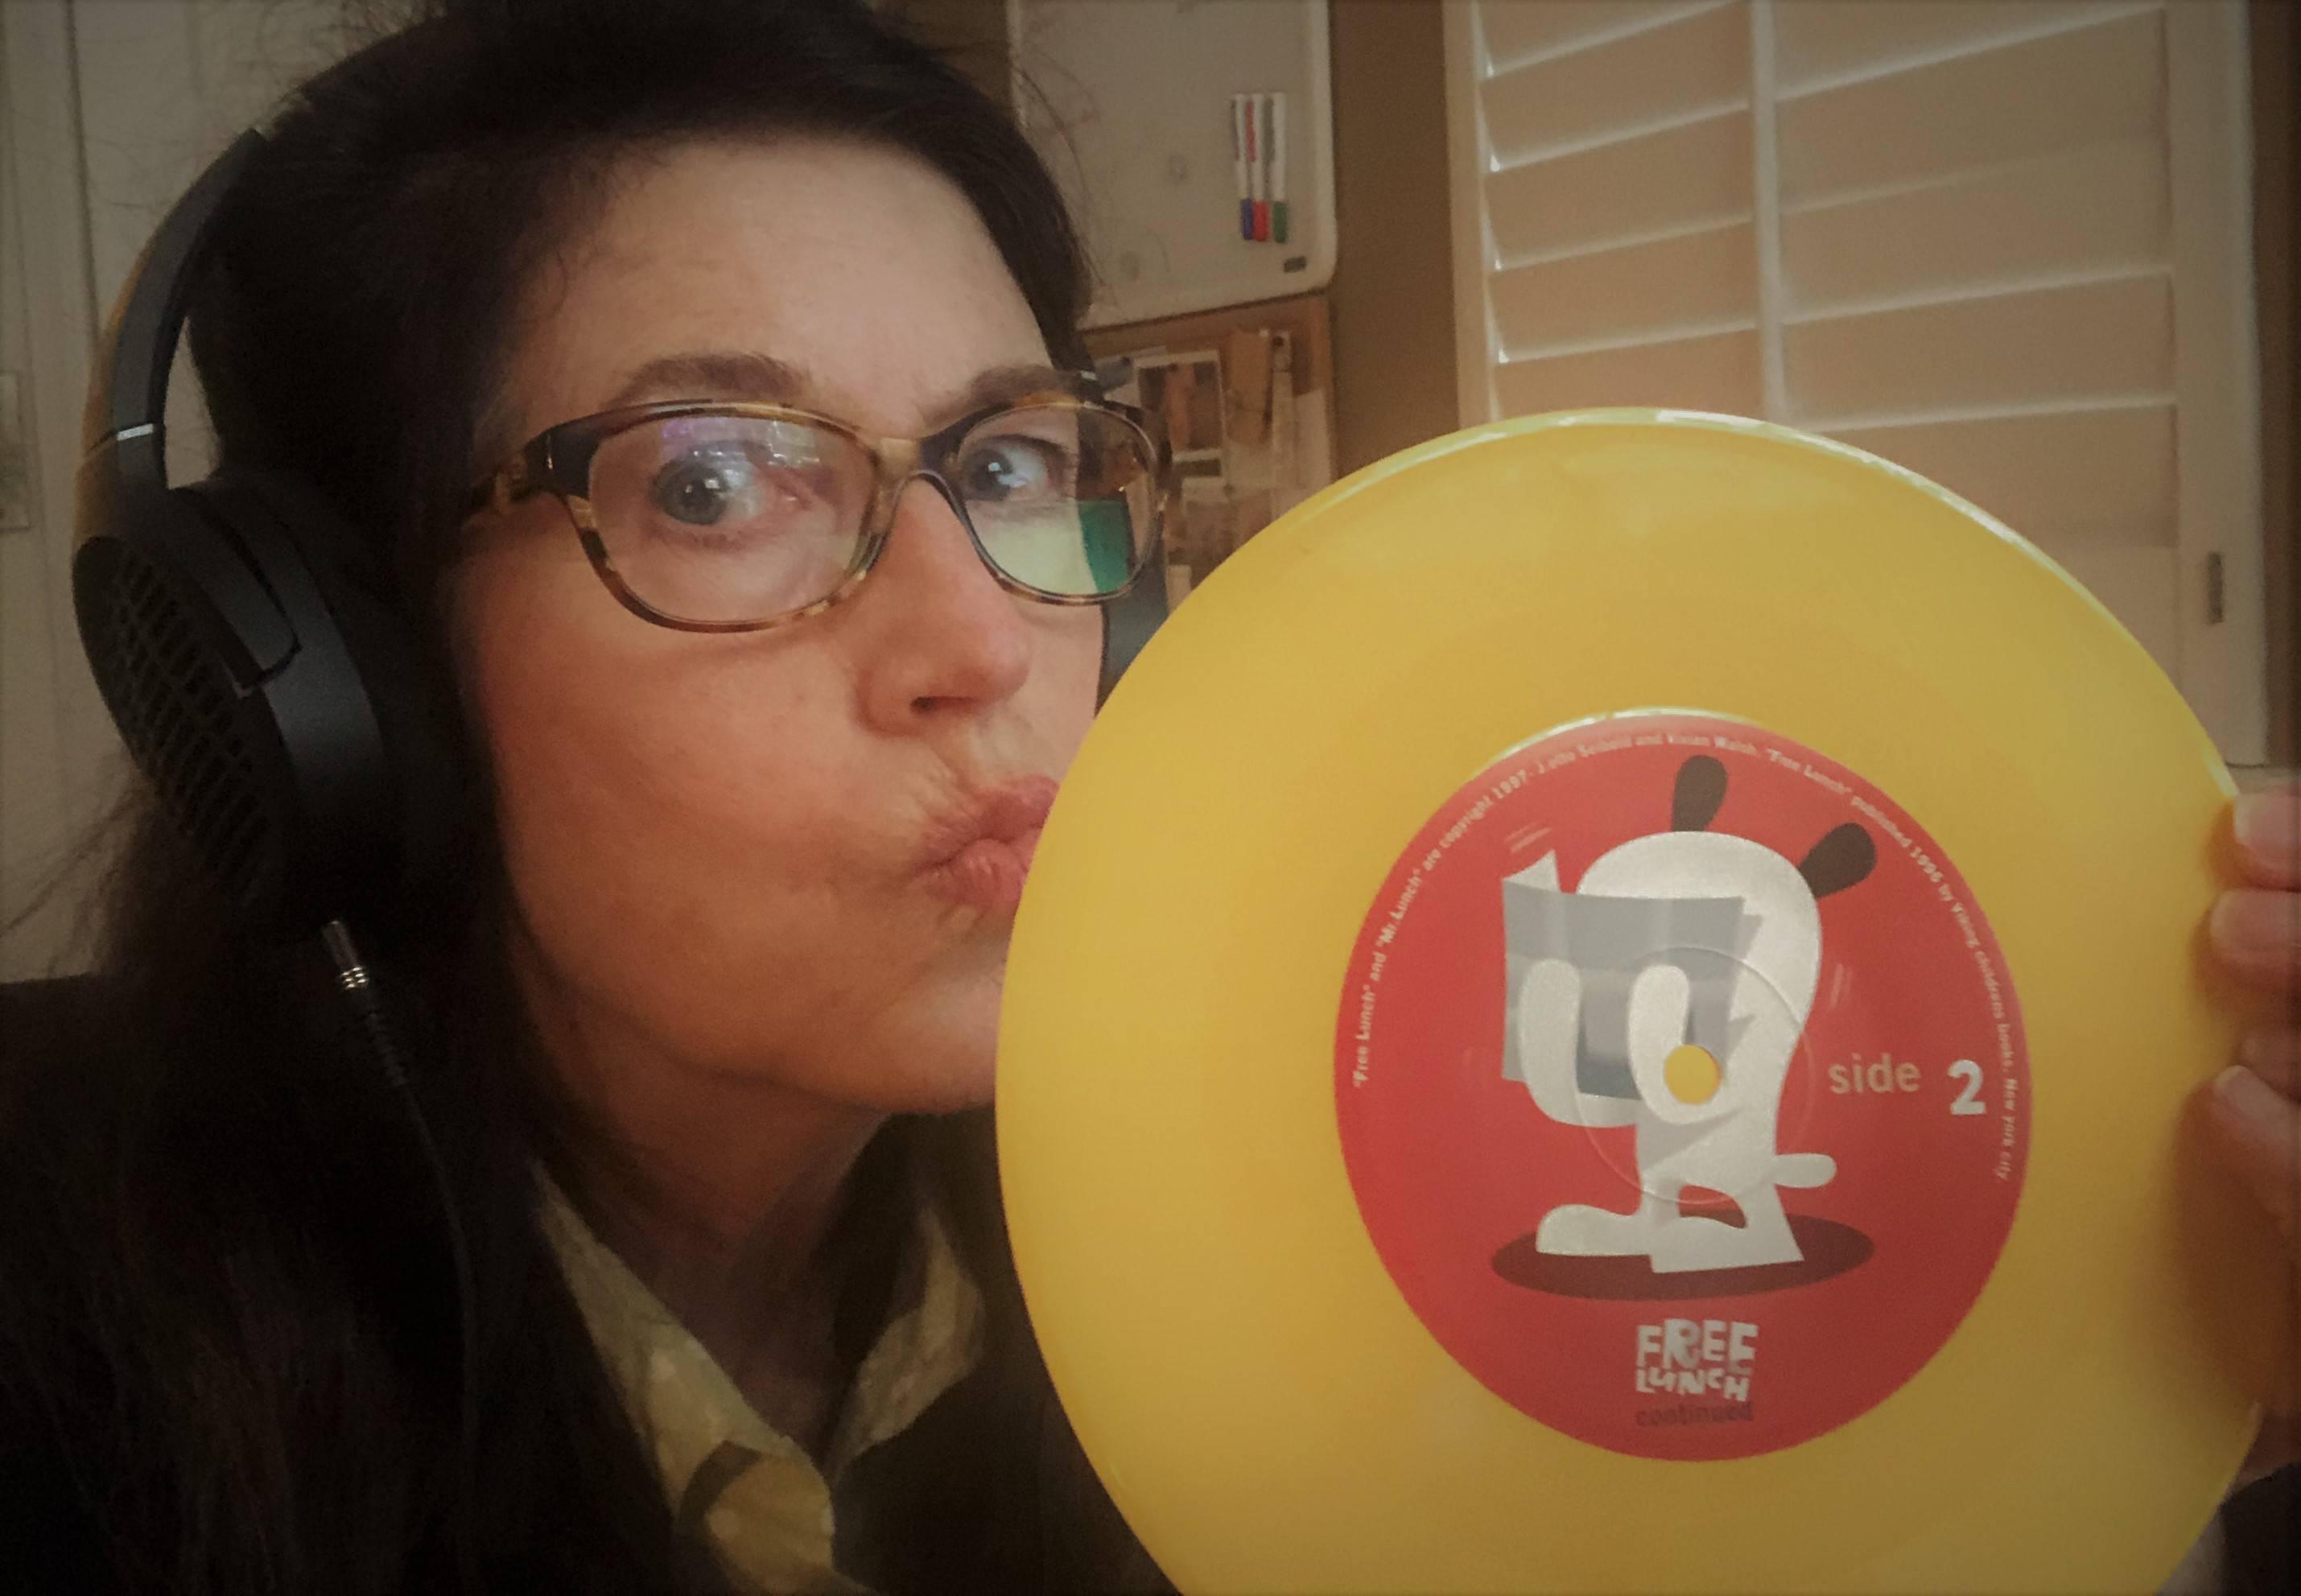 Susan Rogers kissing her Free Lunch album while wearing LCD-1 headphones